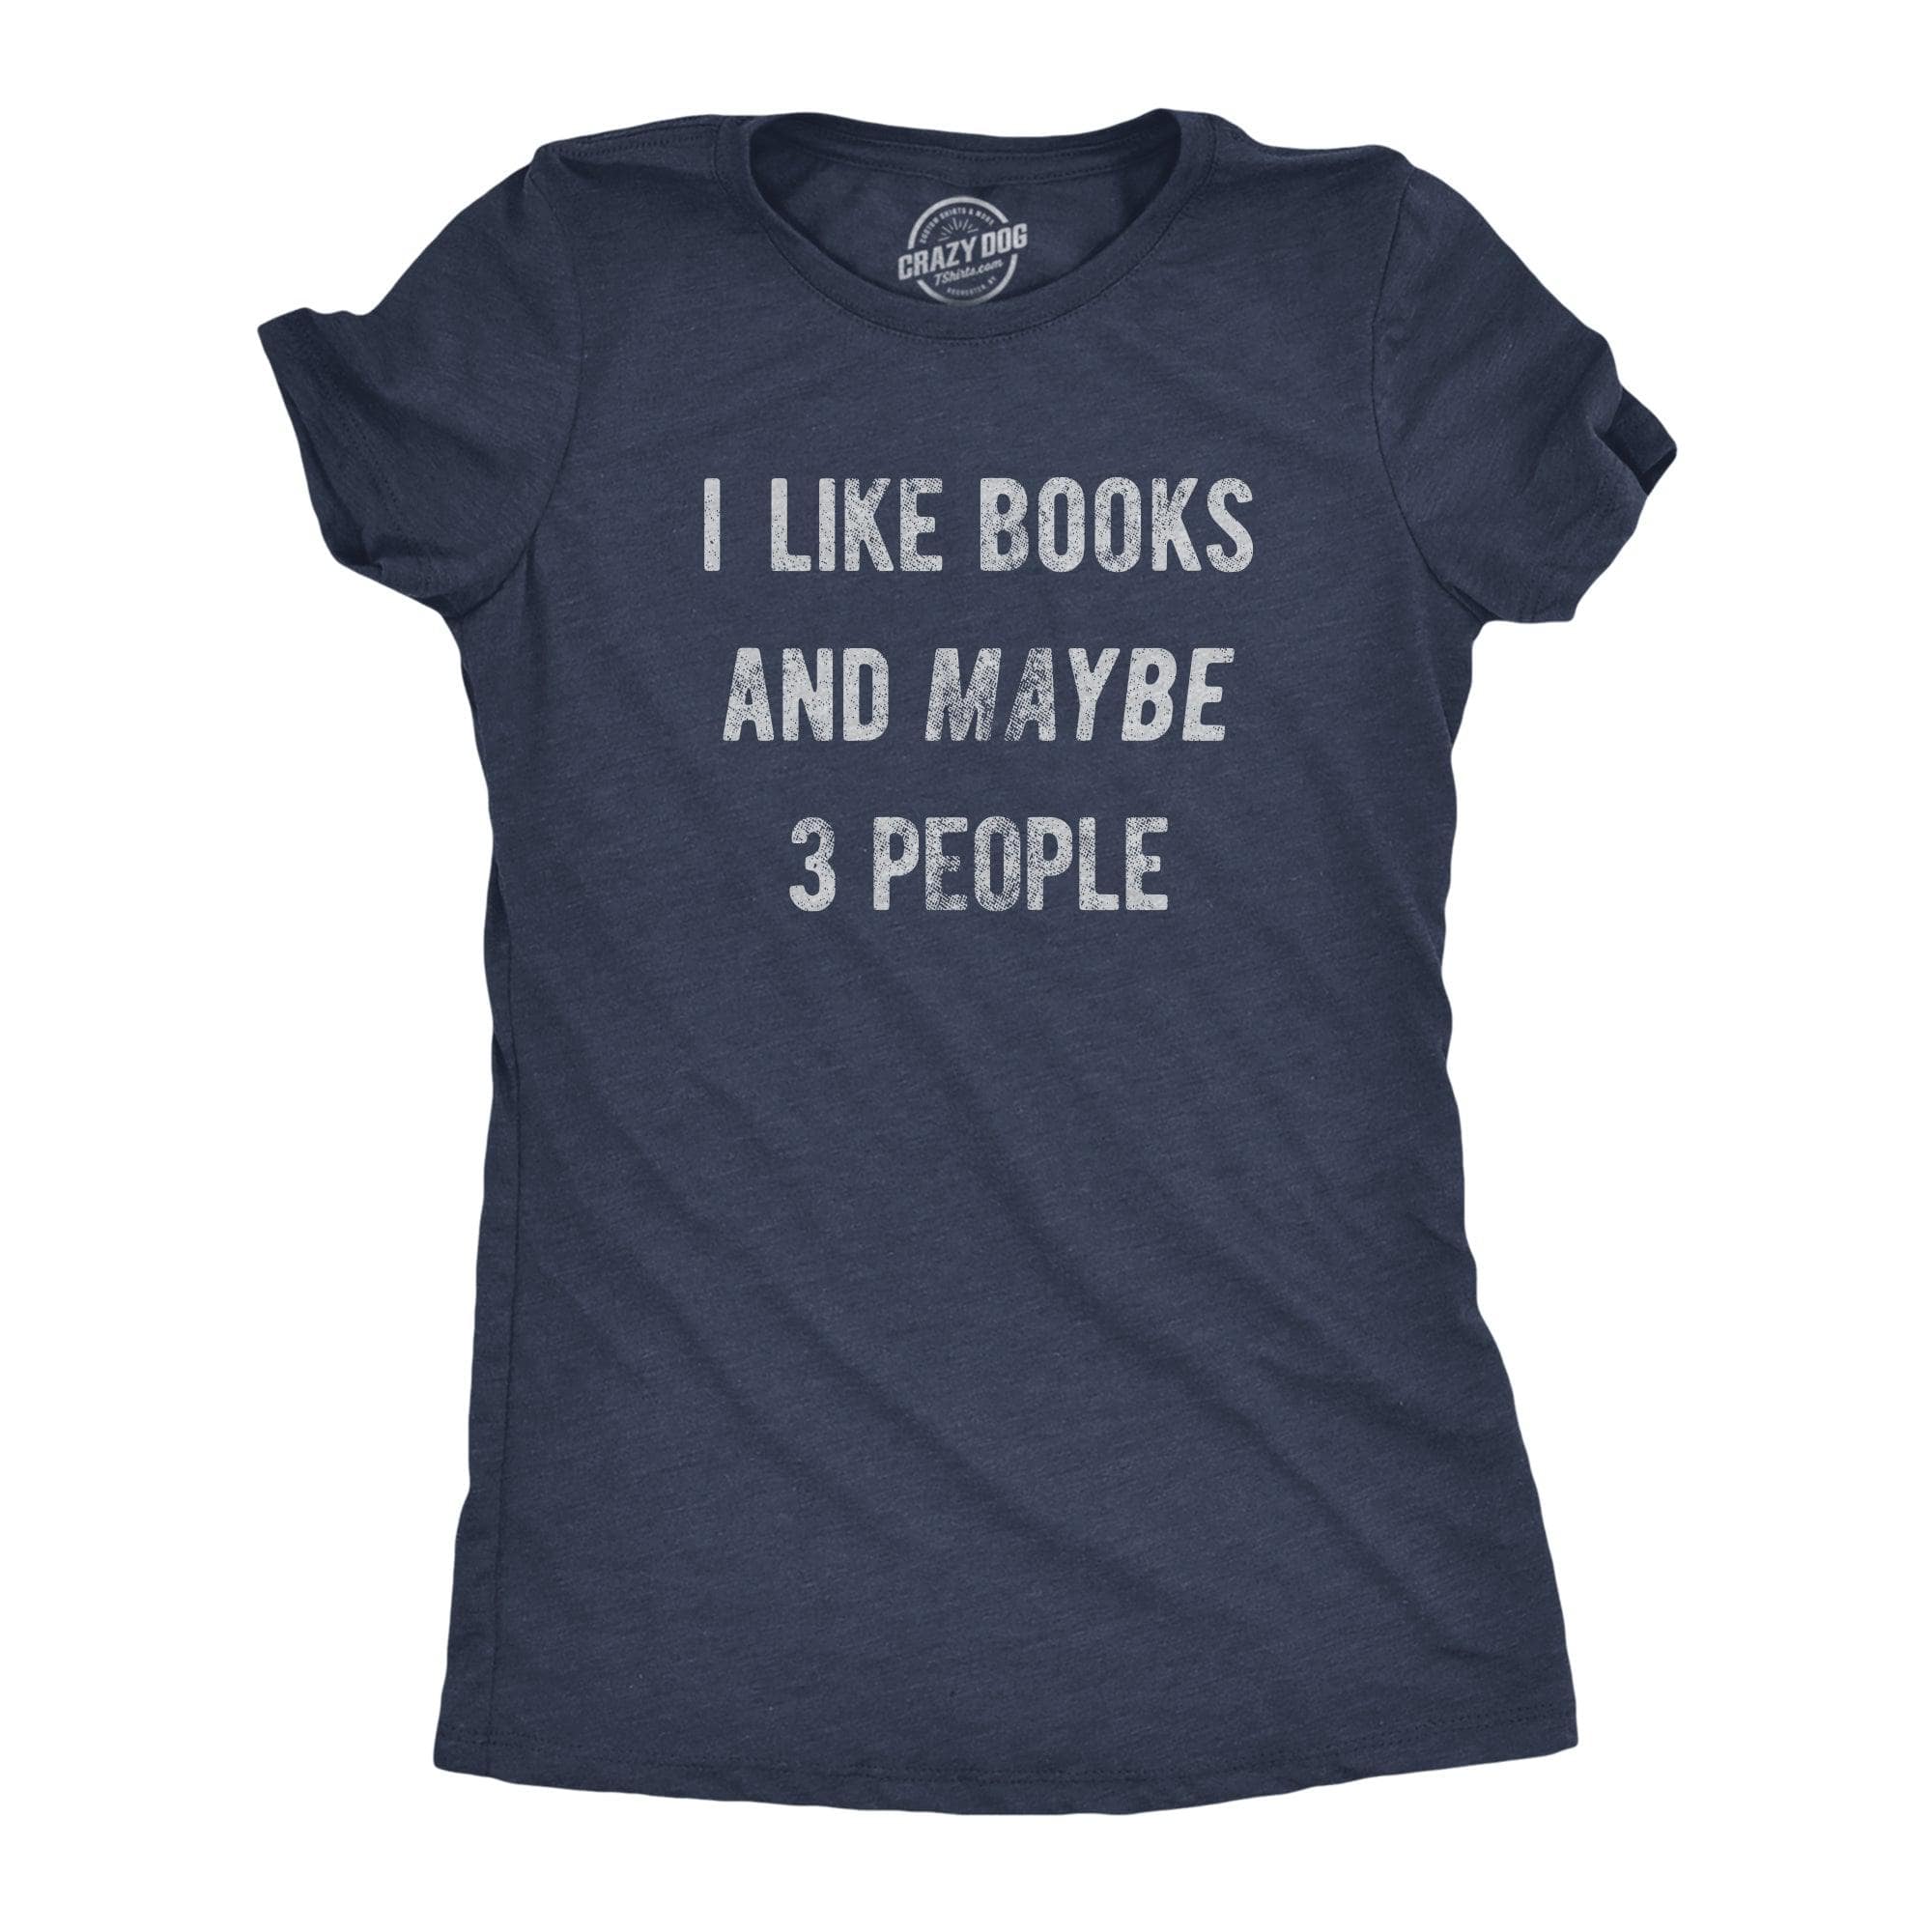 I Like Books And Maybe 3 People Women's Tshirt  -  Crazy Dog T-Shirts